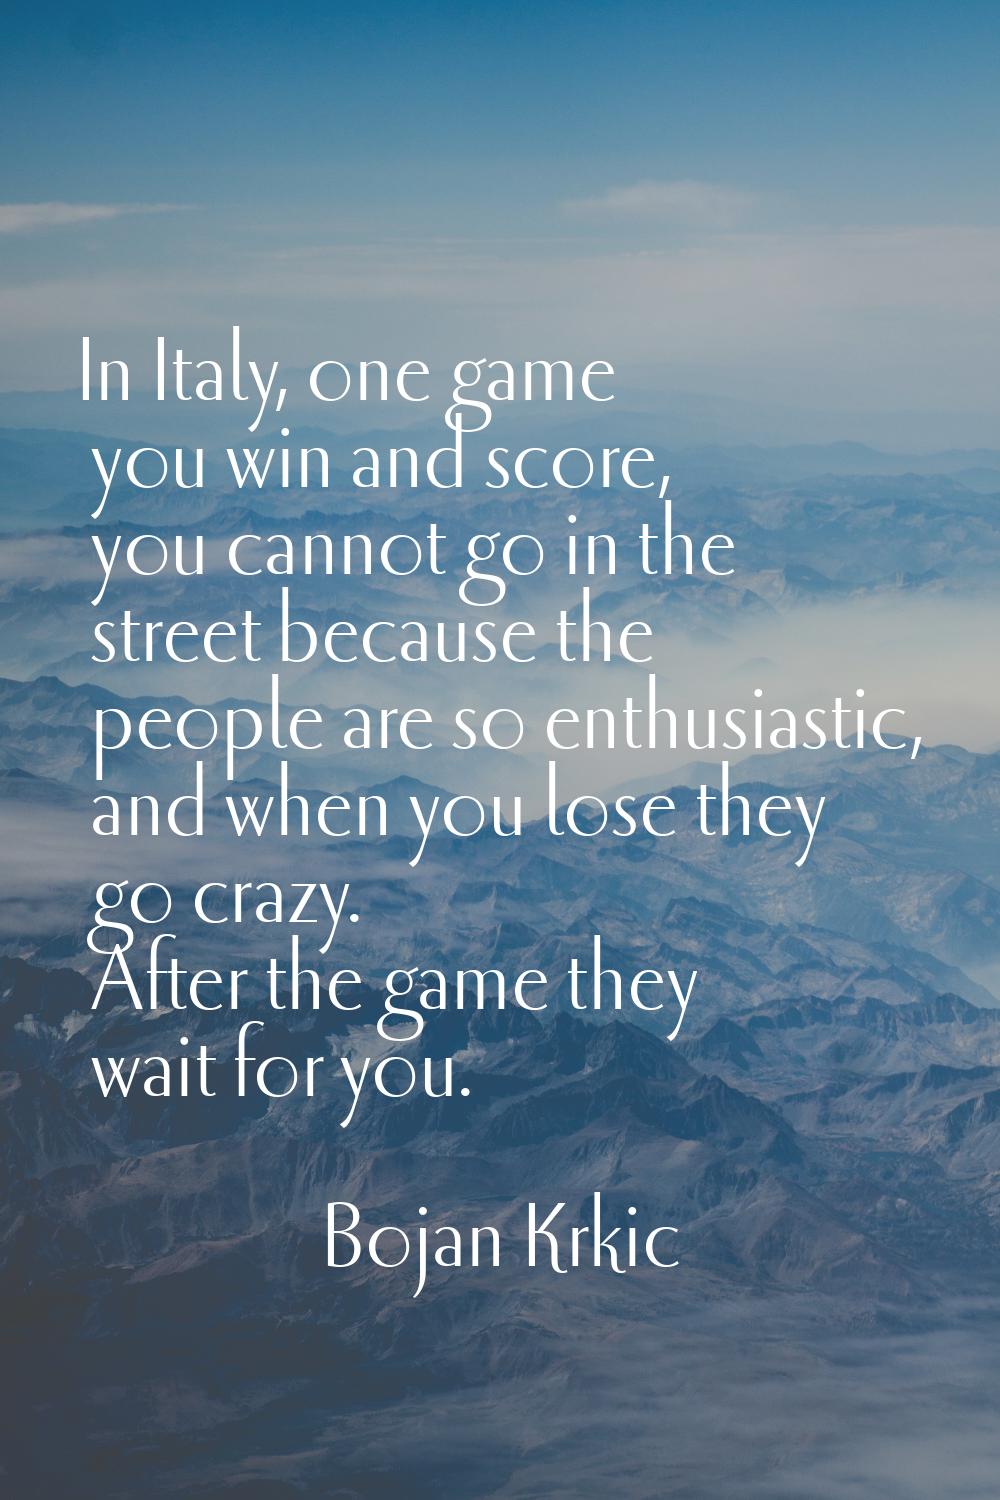 In Italy, one game you win and score, you cannot go in the street because the people are so enthusi